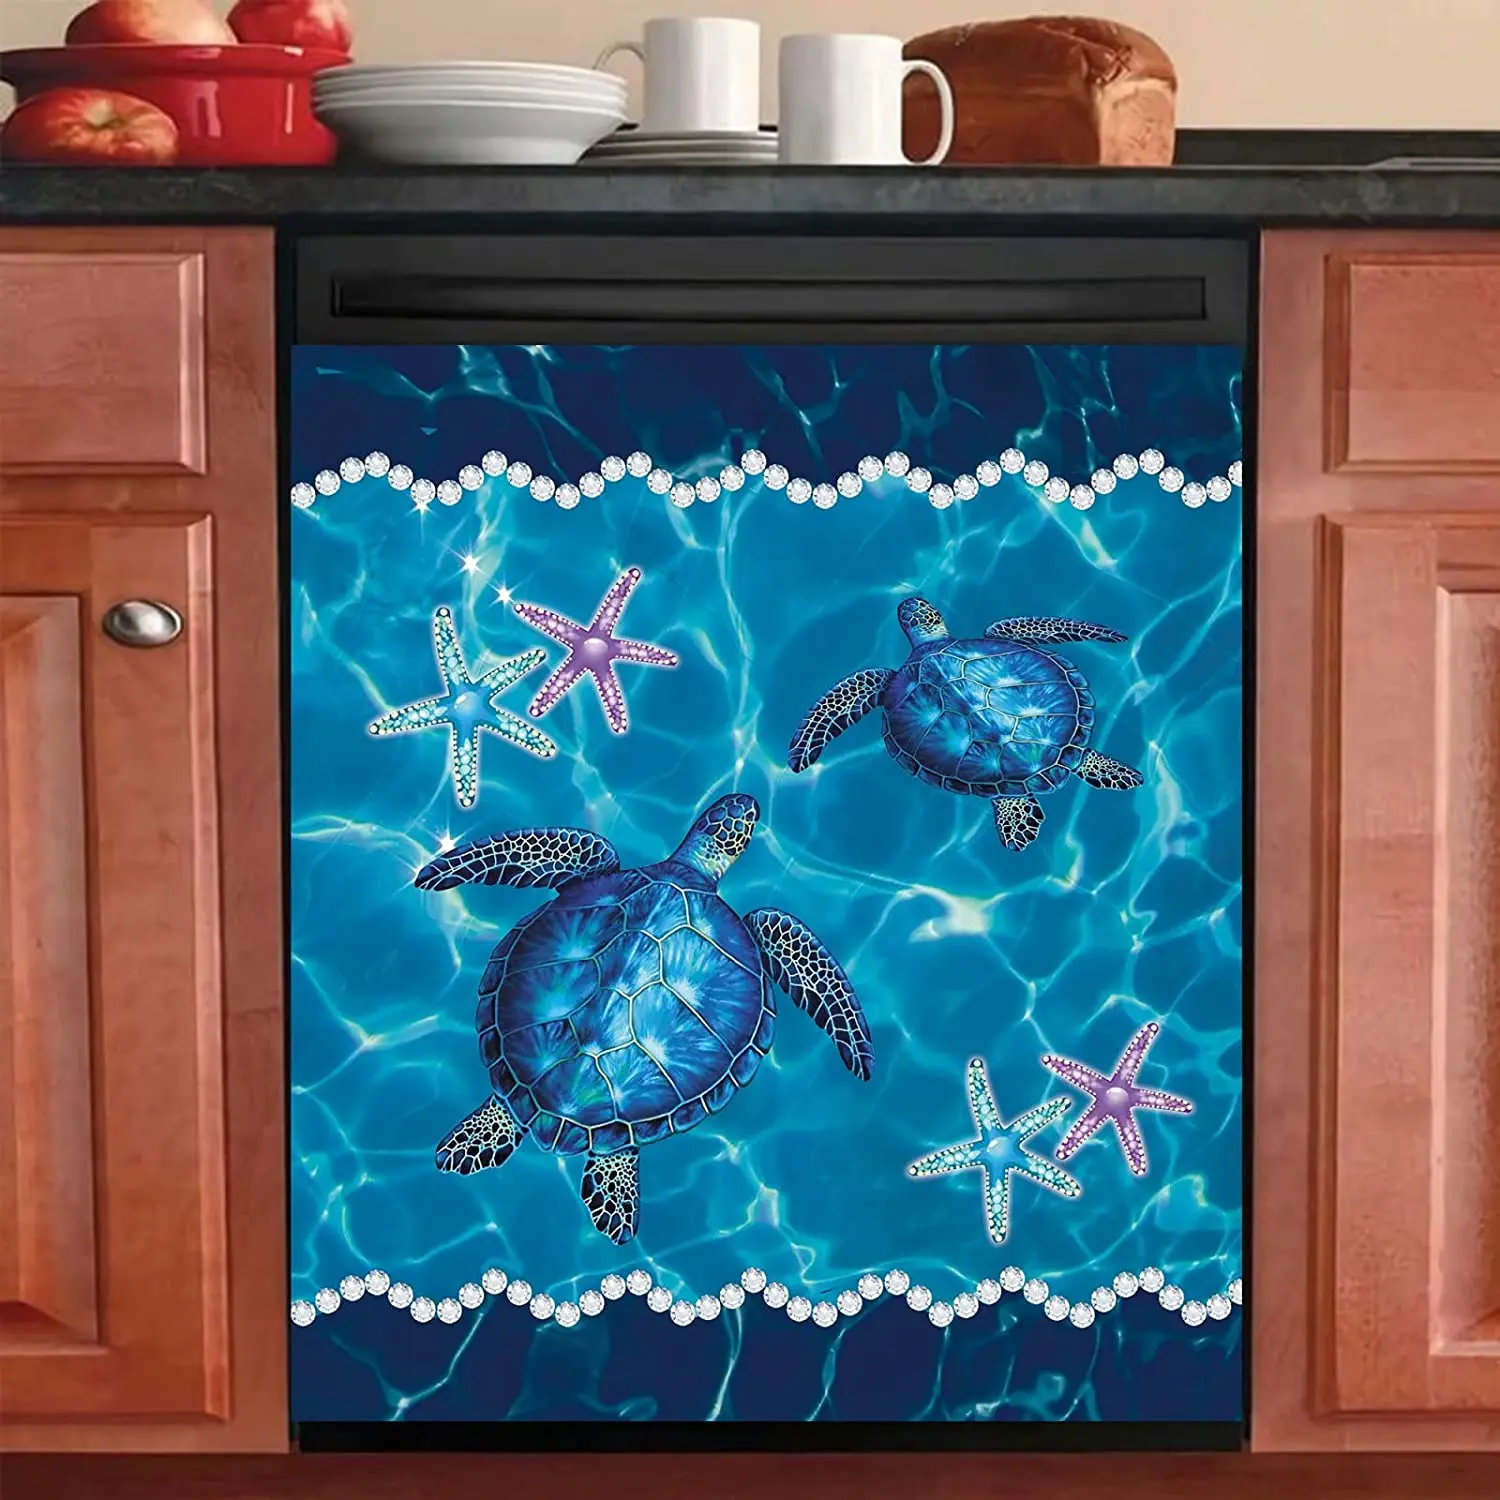 

Homa Turtles Dishwasher Decals, Star Ocean Fridge Magnet Cute Kitchen Decor Refrigerator Magnetic Stickers Home Appliance Cover